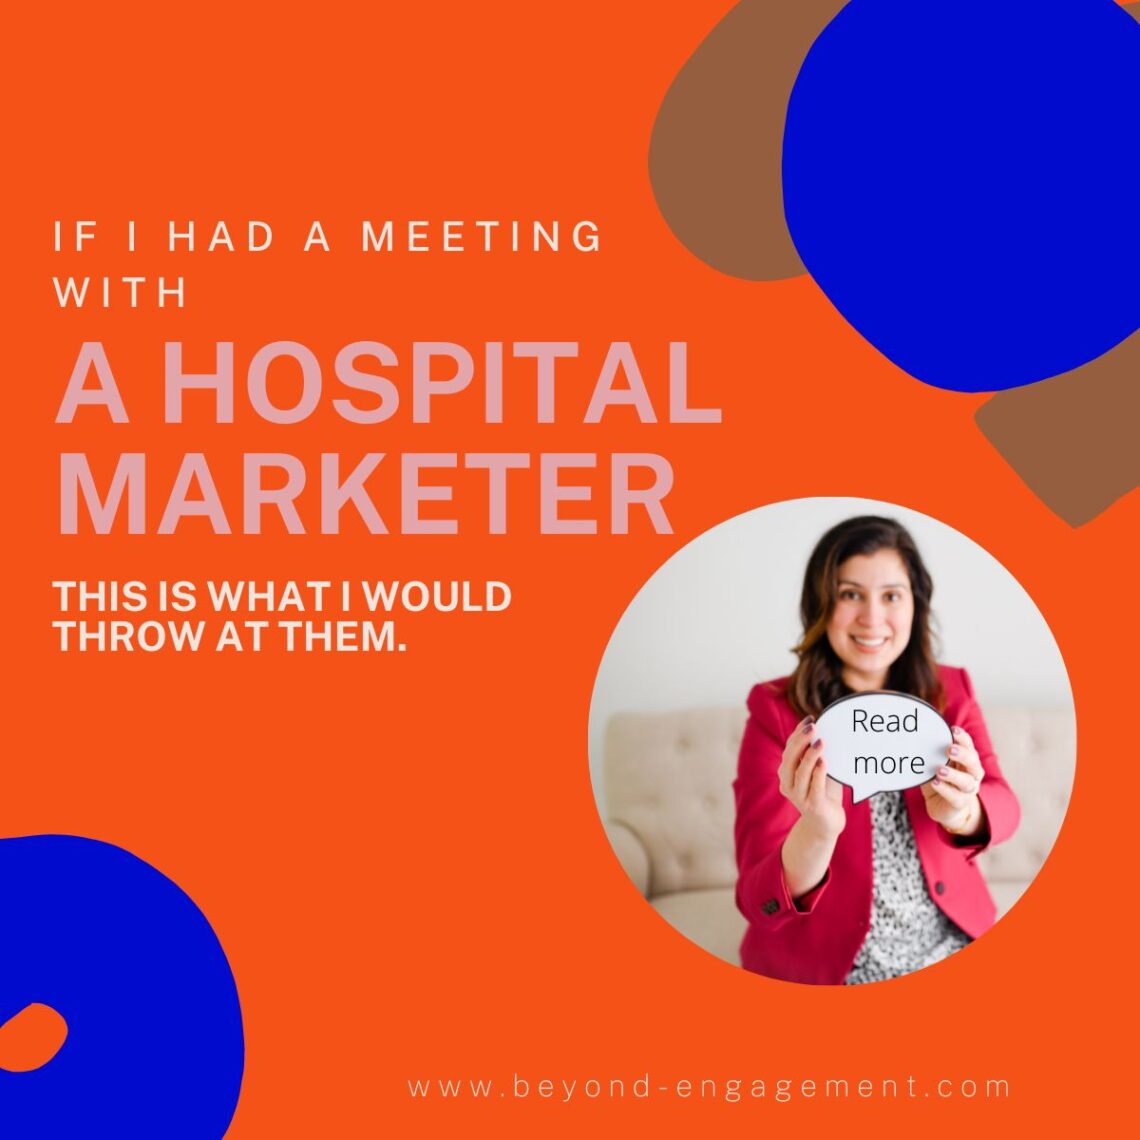 If I had a meeting with a hospital marketer, this is what I would throw at them.